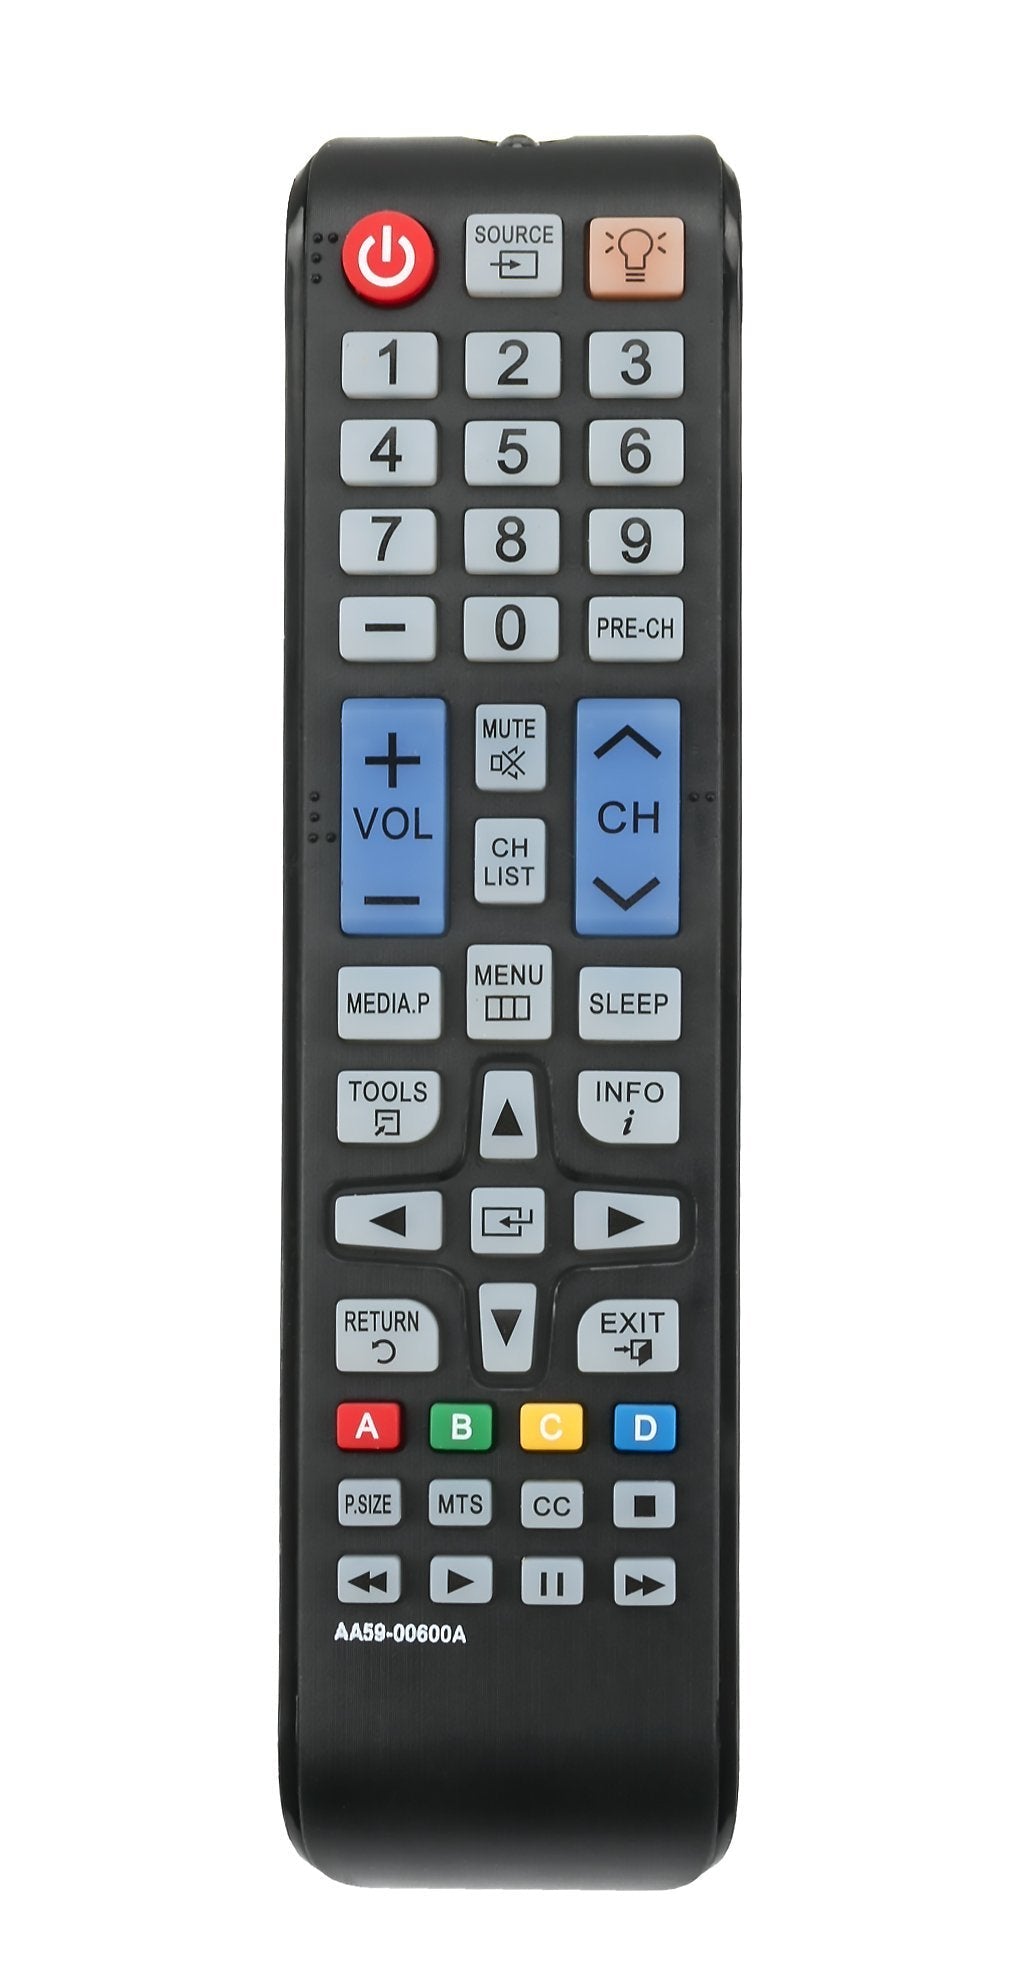 AA59-00600A Replaced Remote fit for Samsung TV UN22F5000 UN32F5000 UN40F5000 UN46F5000 UN50F5000 UN40EH6000 UN40EH6050 UN46EH6000 UN46EH6050 UN50EH6000 UN50EH6050 UN55EH6000 UN55EH6050 UN60EH6000 - LeoForward Australia